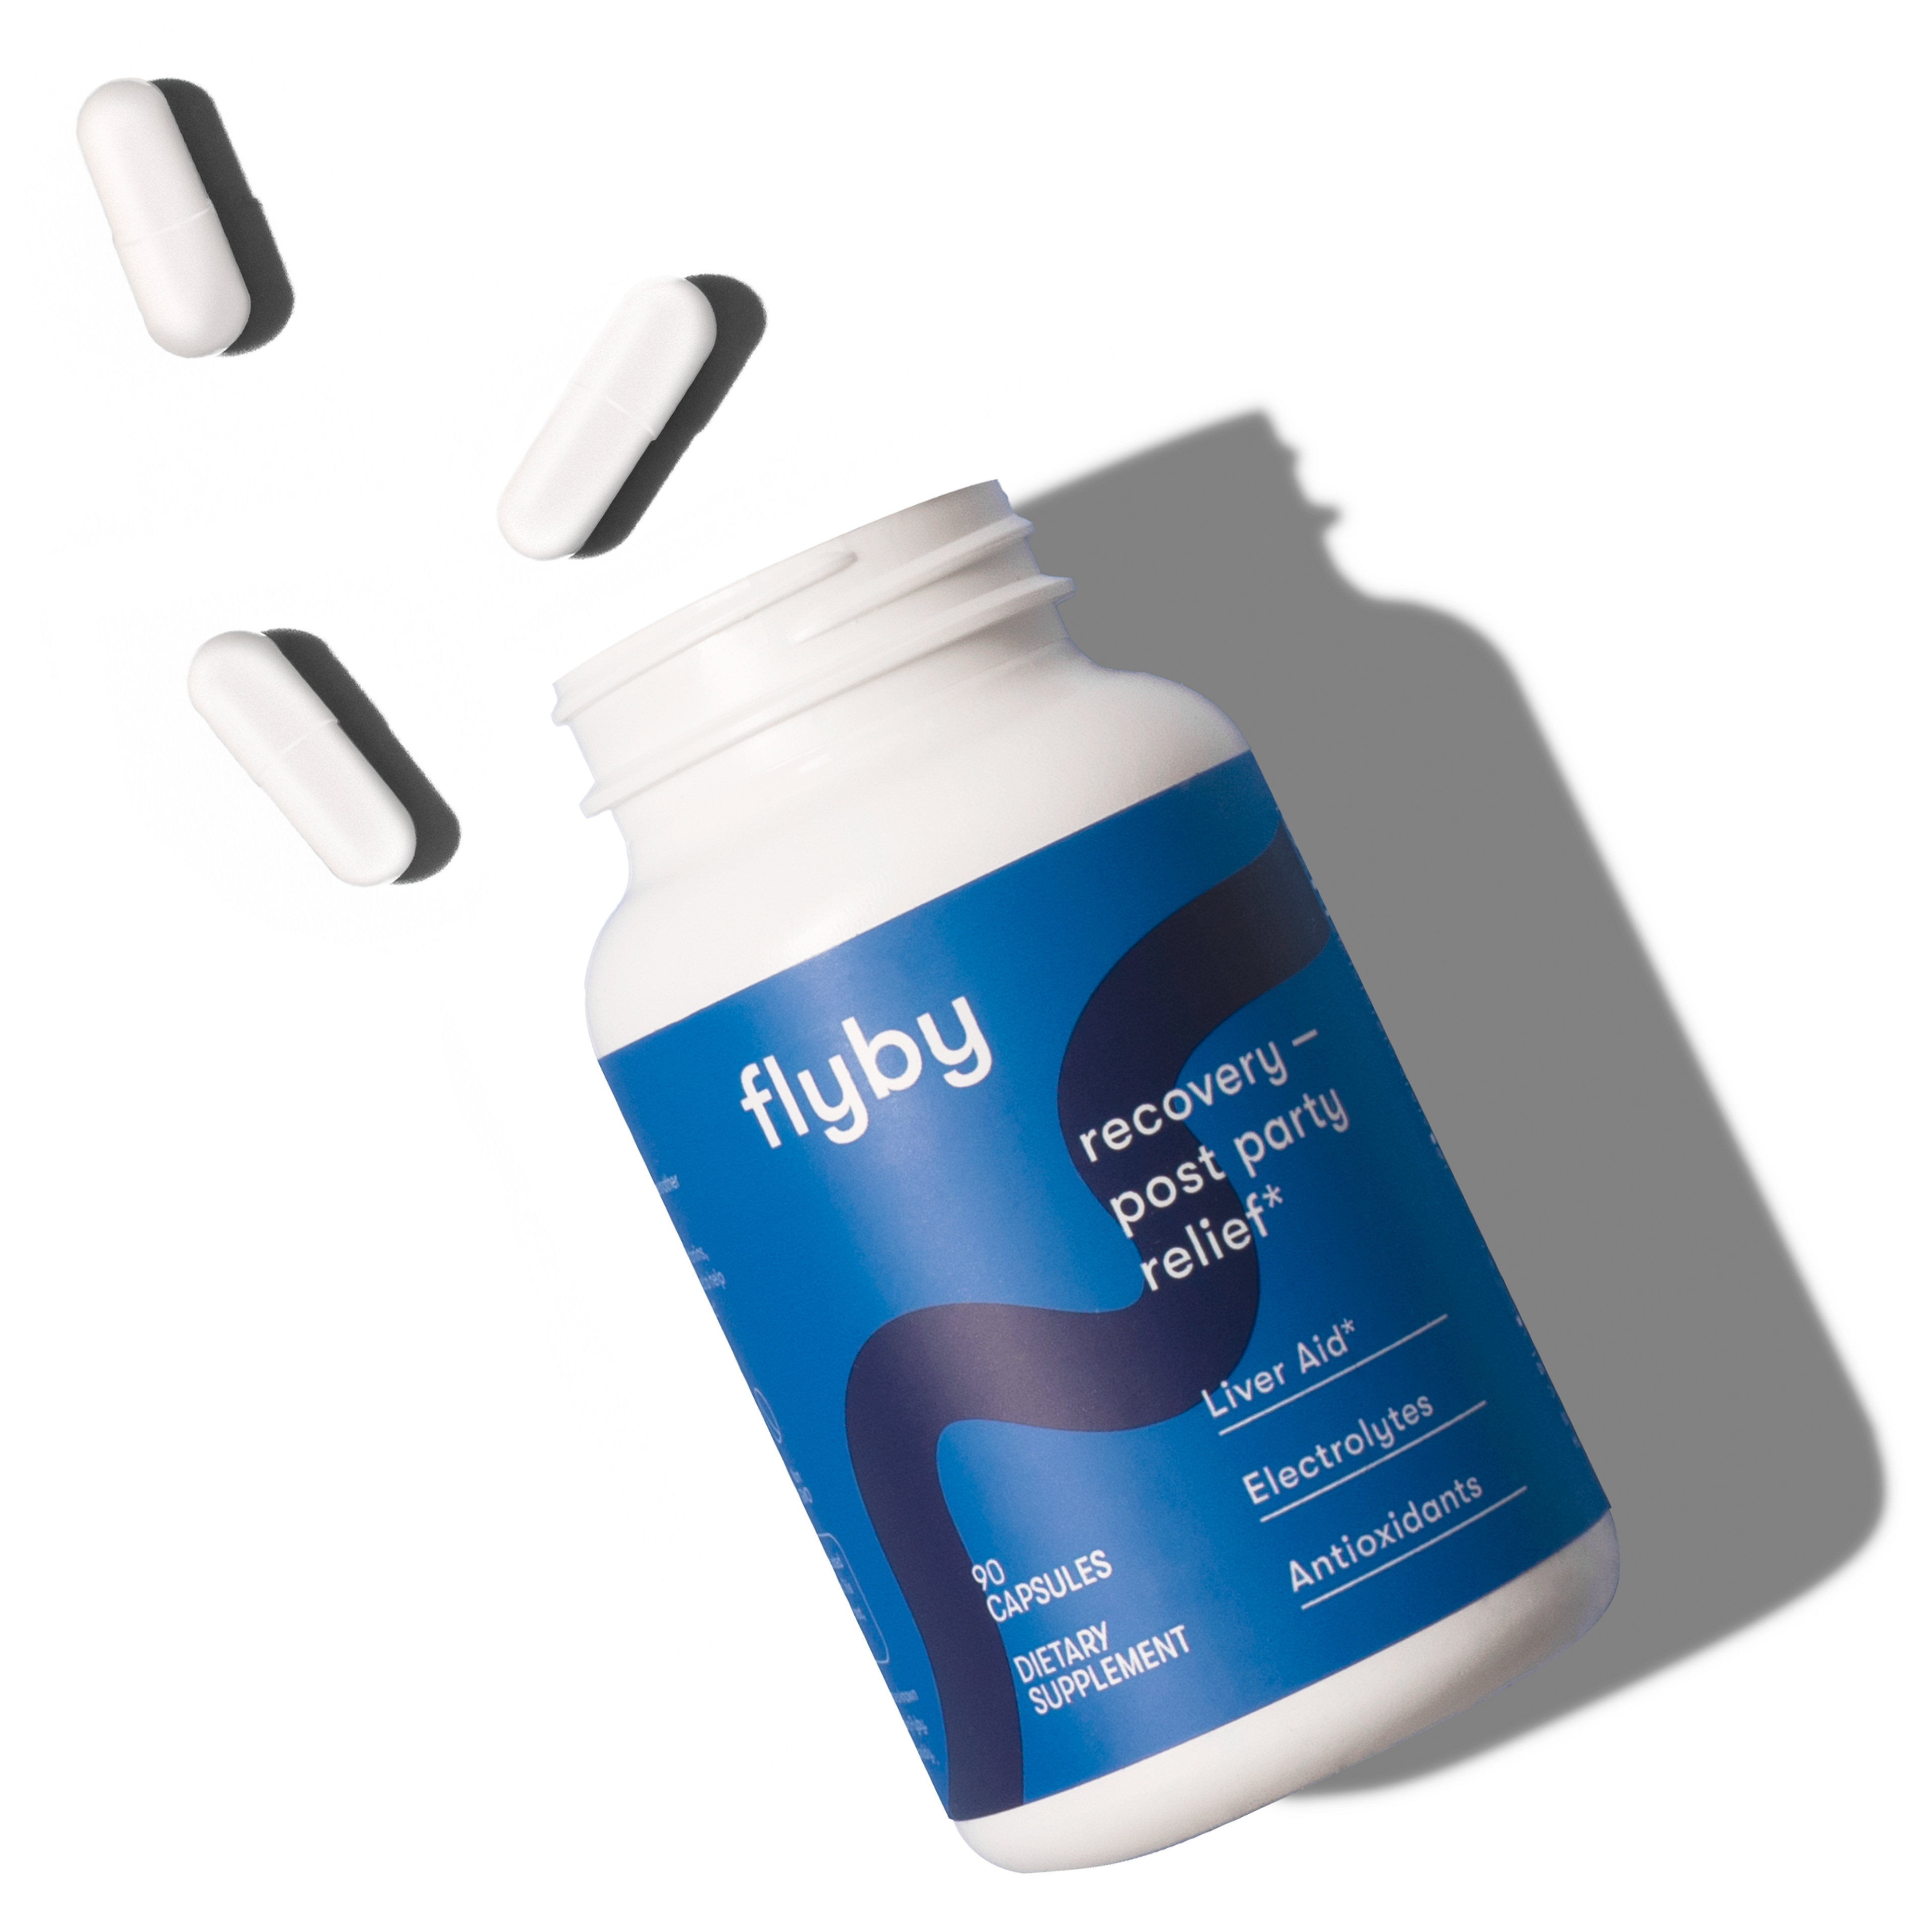 www.flyby.co/products/recovery-capsules